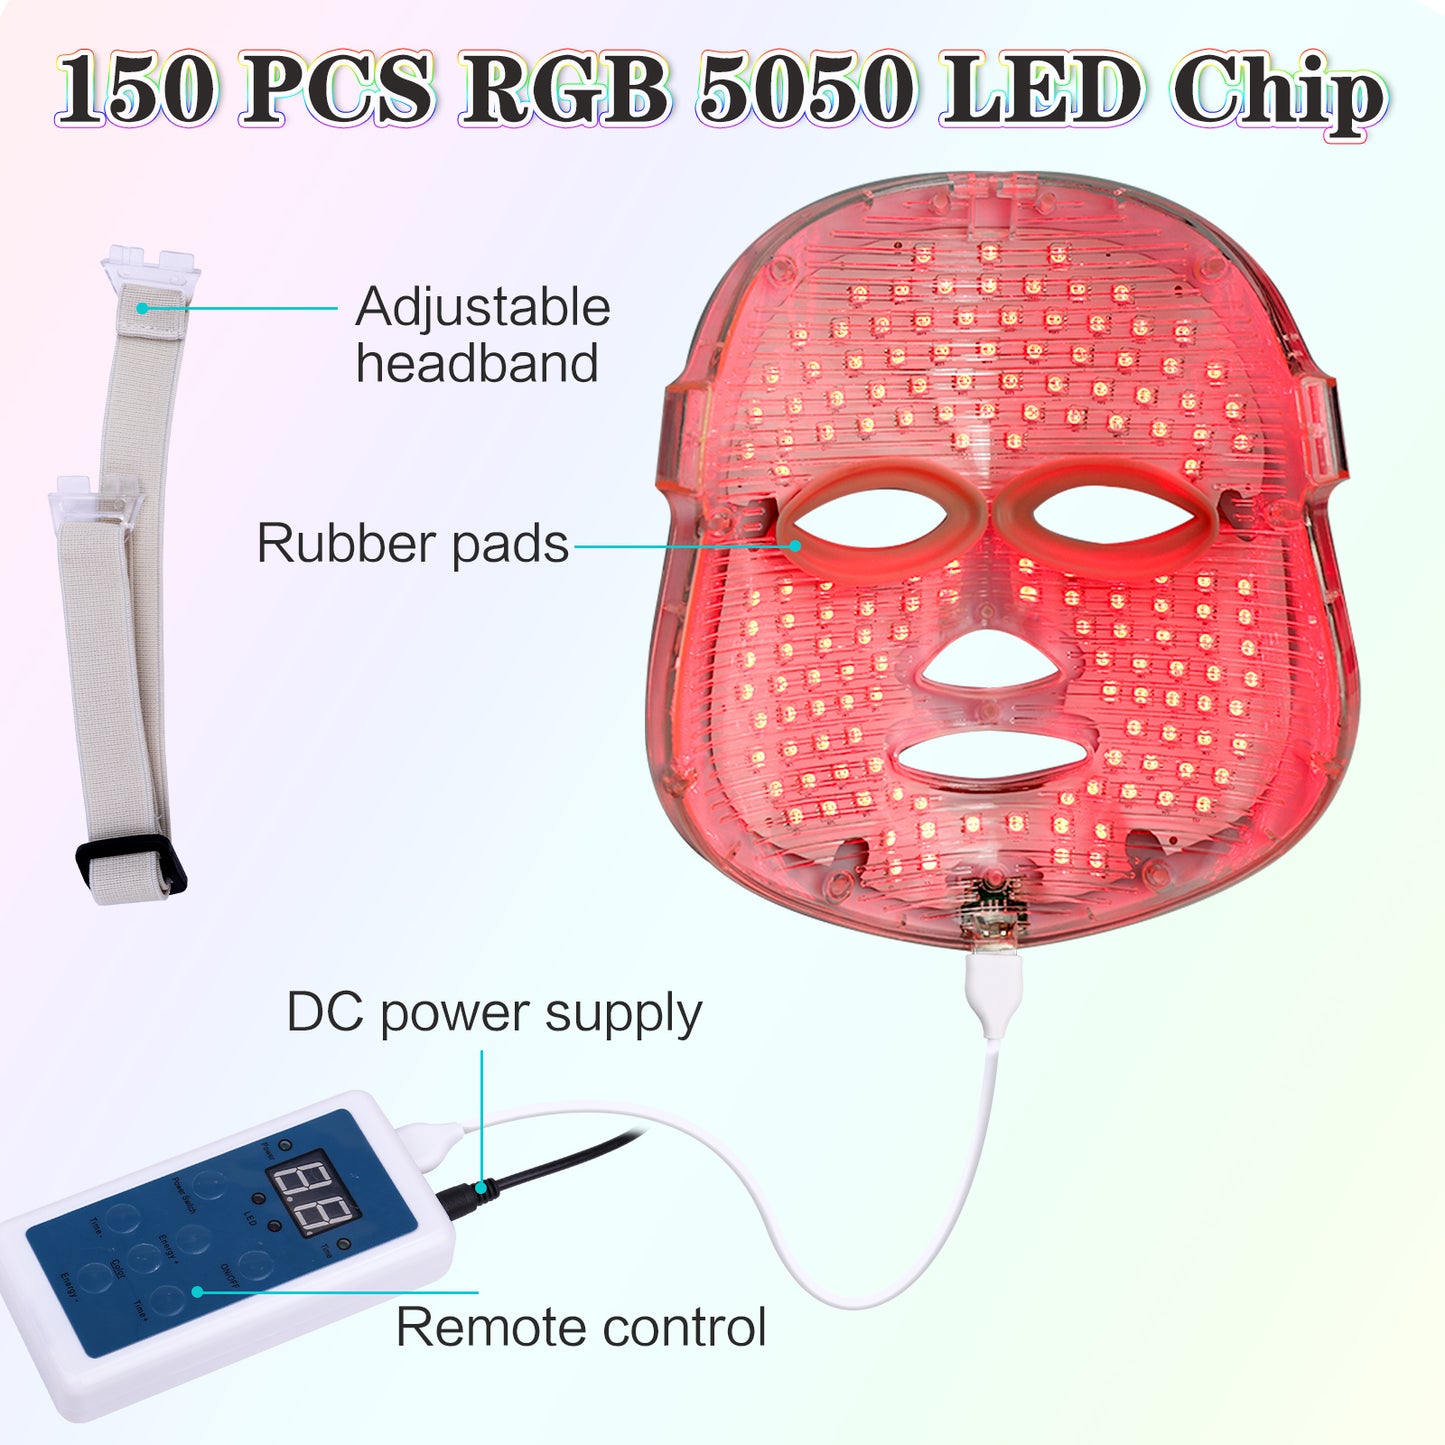 CARER Healthcare Incontinence Pregnancy Electronic Aesthetic Skin Treatment Devices Using Light Emitting Diodes, Namely, Infrared, Red, Orange, Yellow, Green, And Blue Wavelengths For Generating Light Rays